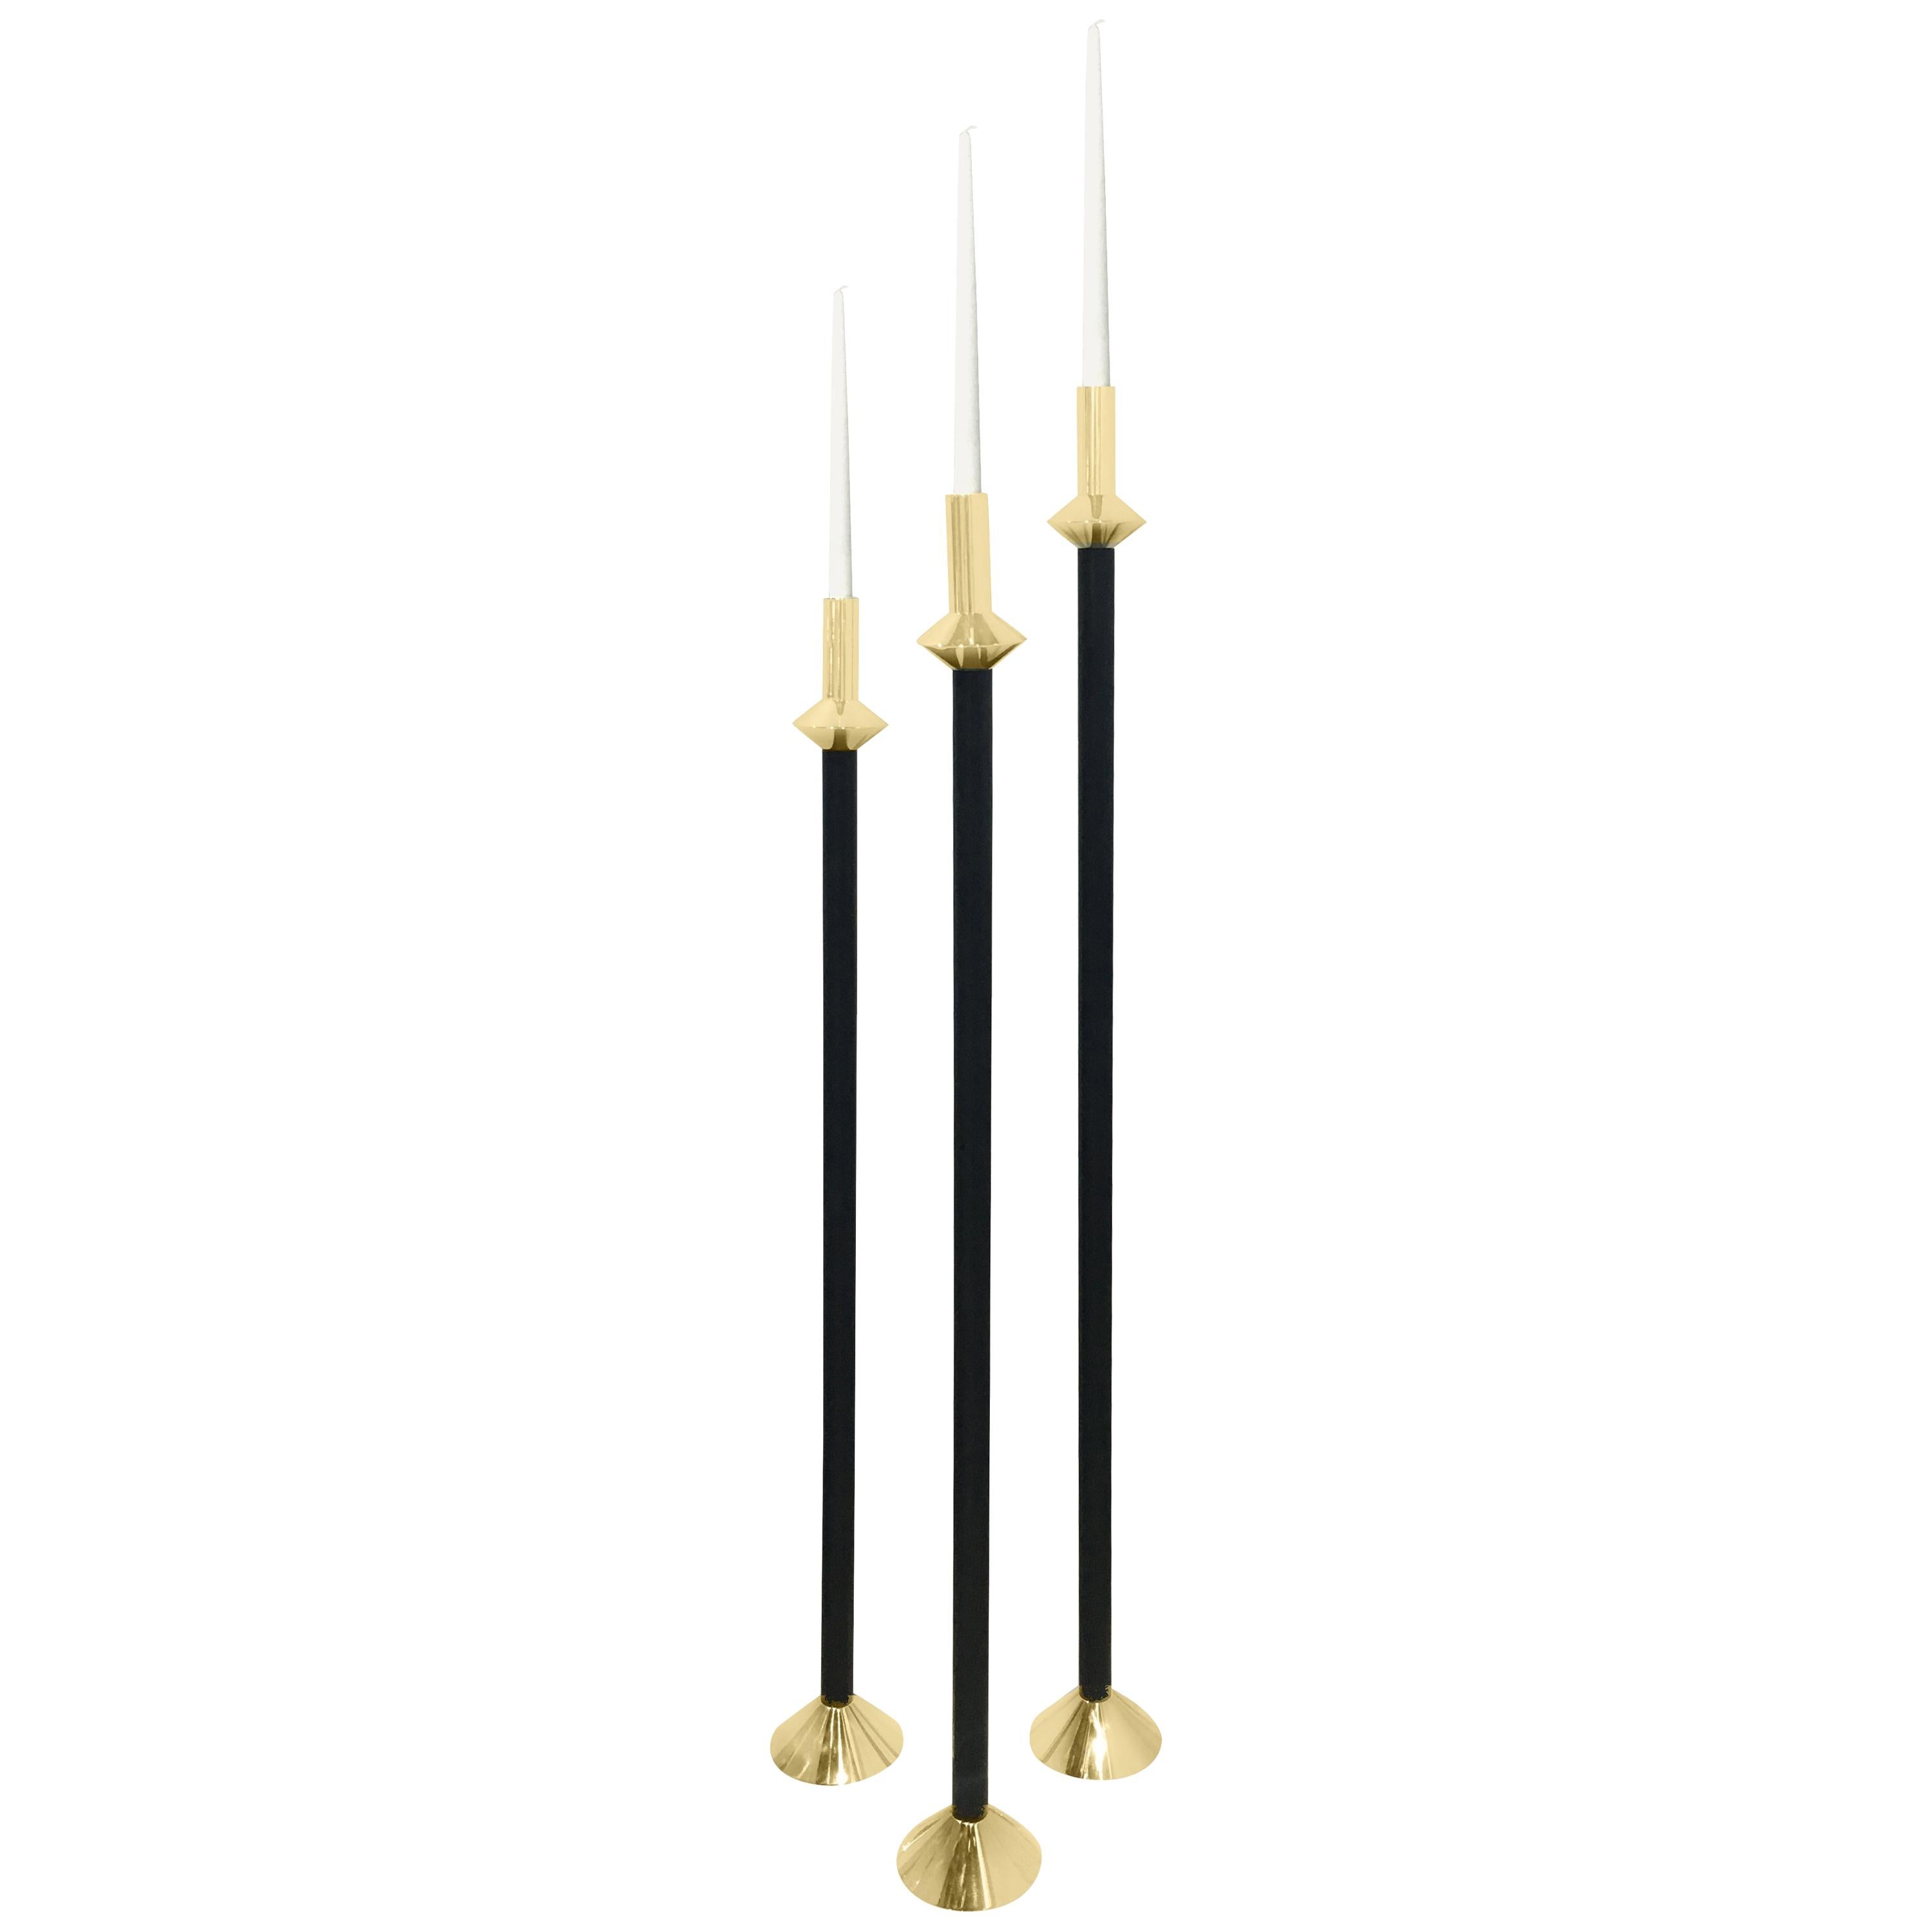 Contemporary Swedish Brass and Leather Modern Minimalist Candleholders, Small For Sale